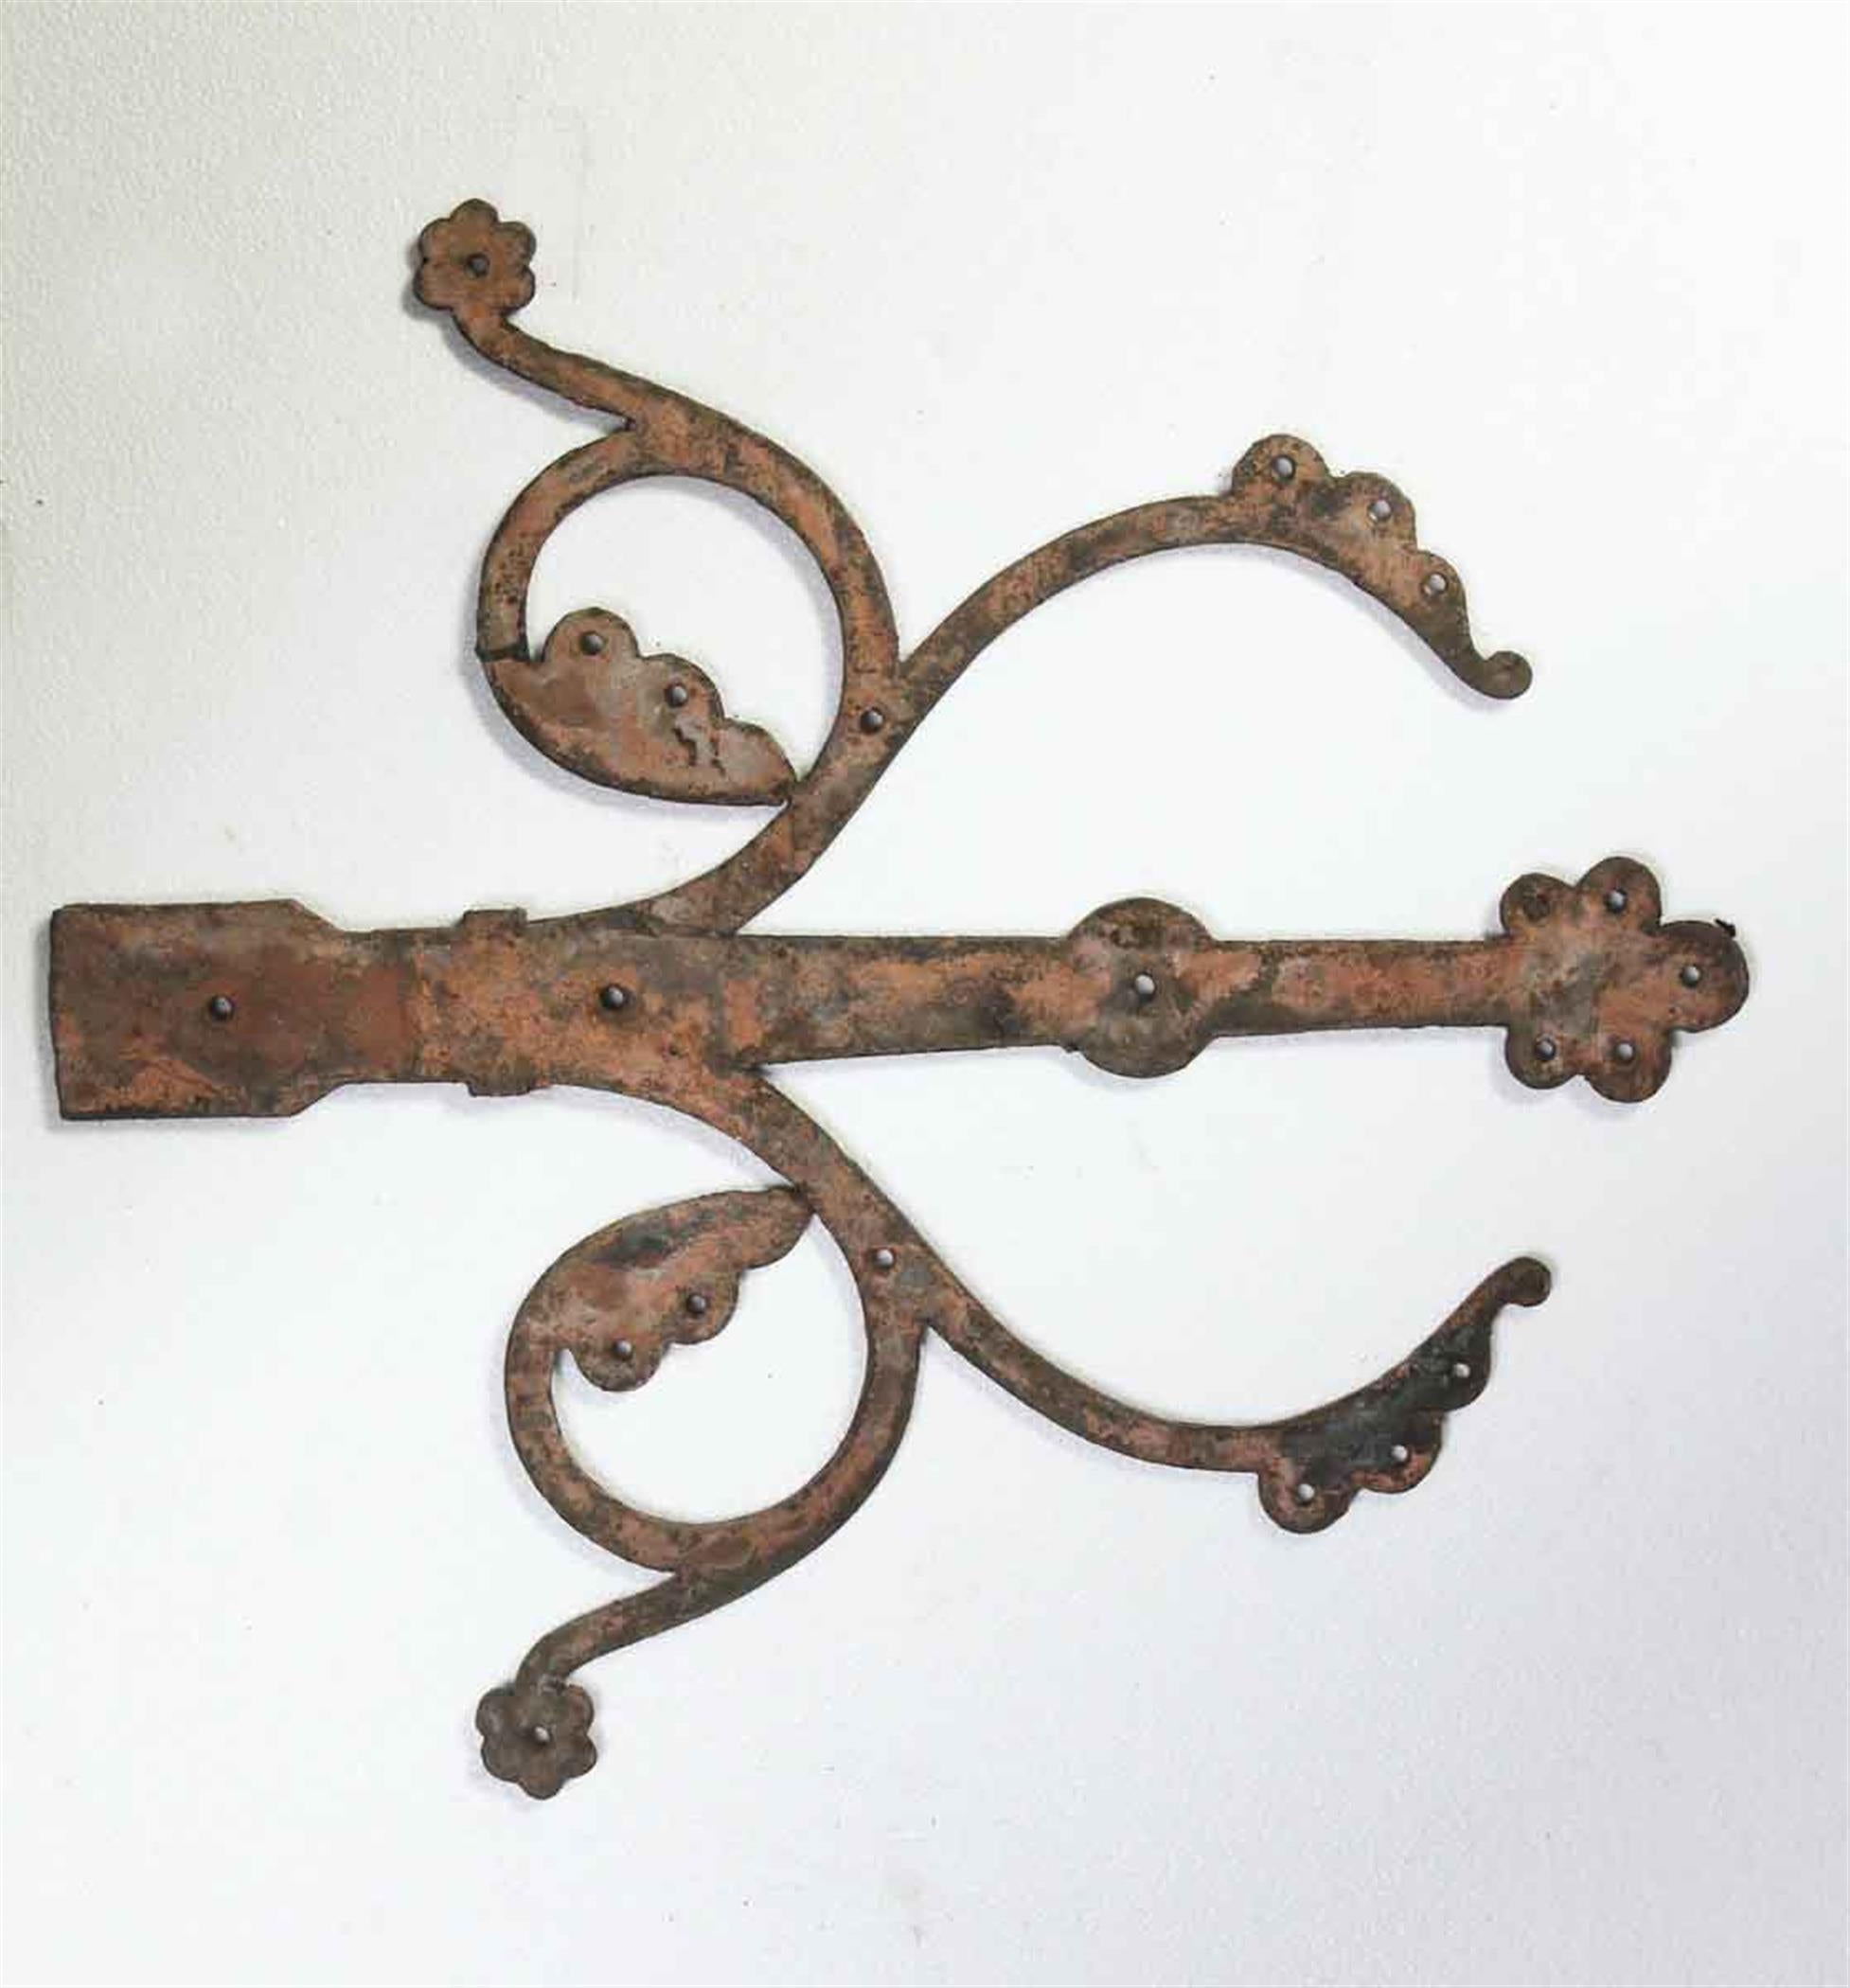 1910 Art Nouveau wrought iron decorative dummy strap antique door hinges hardware for the front of very large doors. Priced as a pair. This can be seen at our 400 Gilligan St location in Scranton, PA.